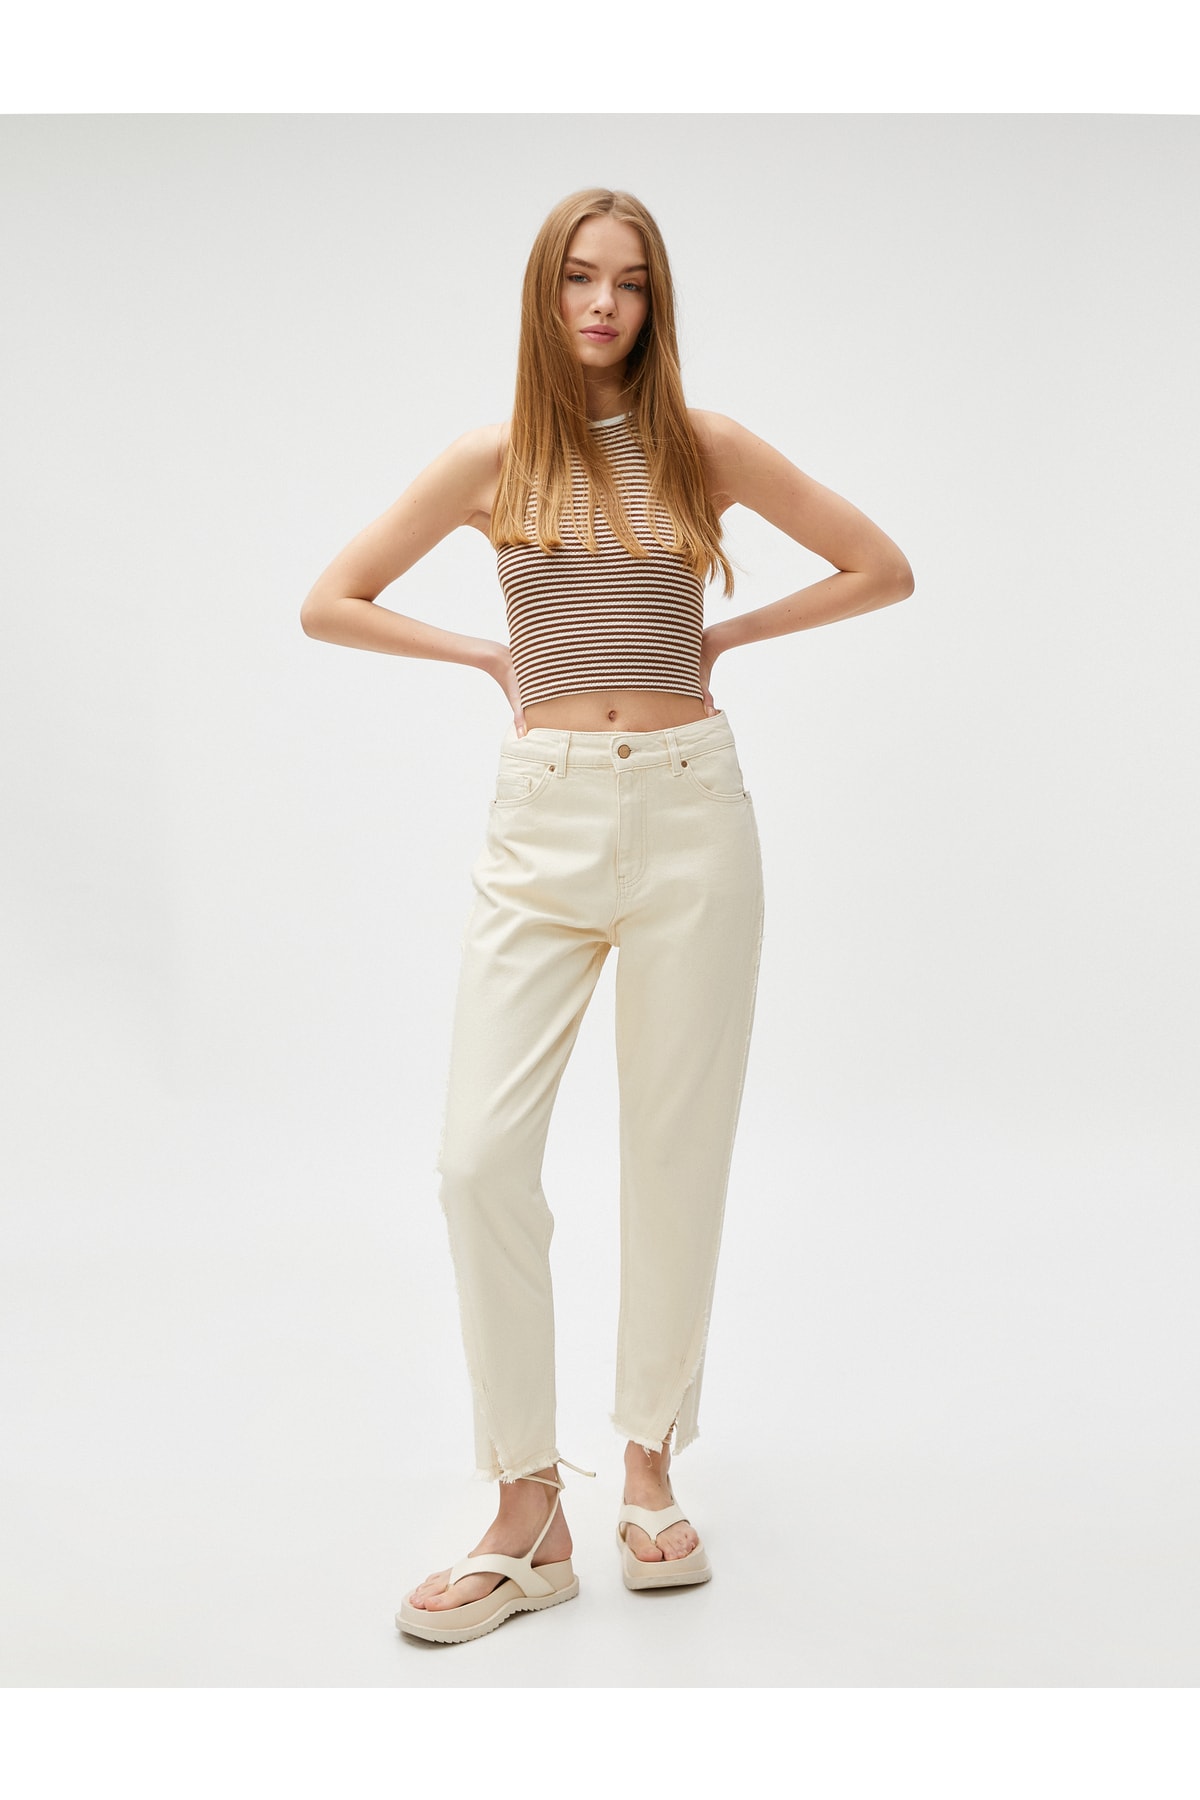 Koton High Waisted jeans. Relaxed fit, Slightly Skinny Legs - Mom Jeans.